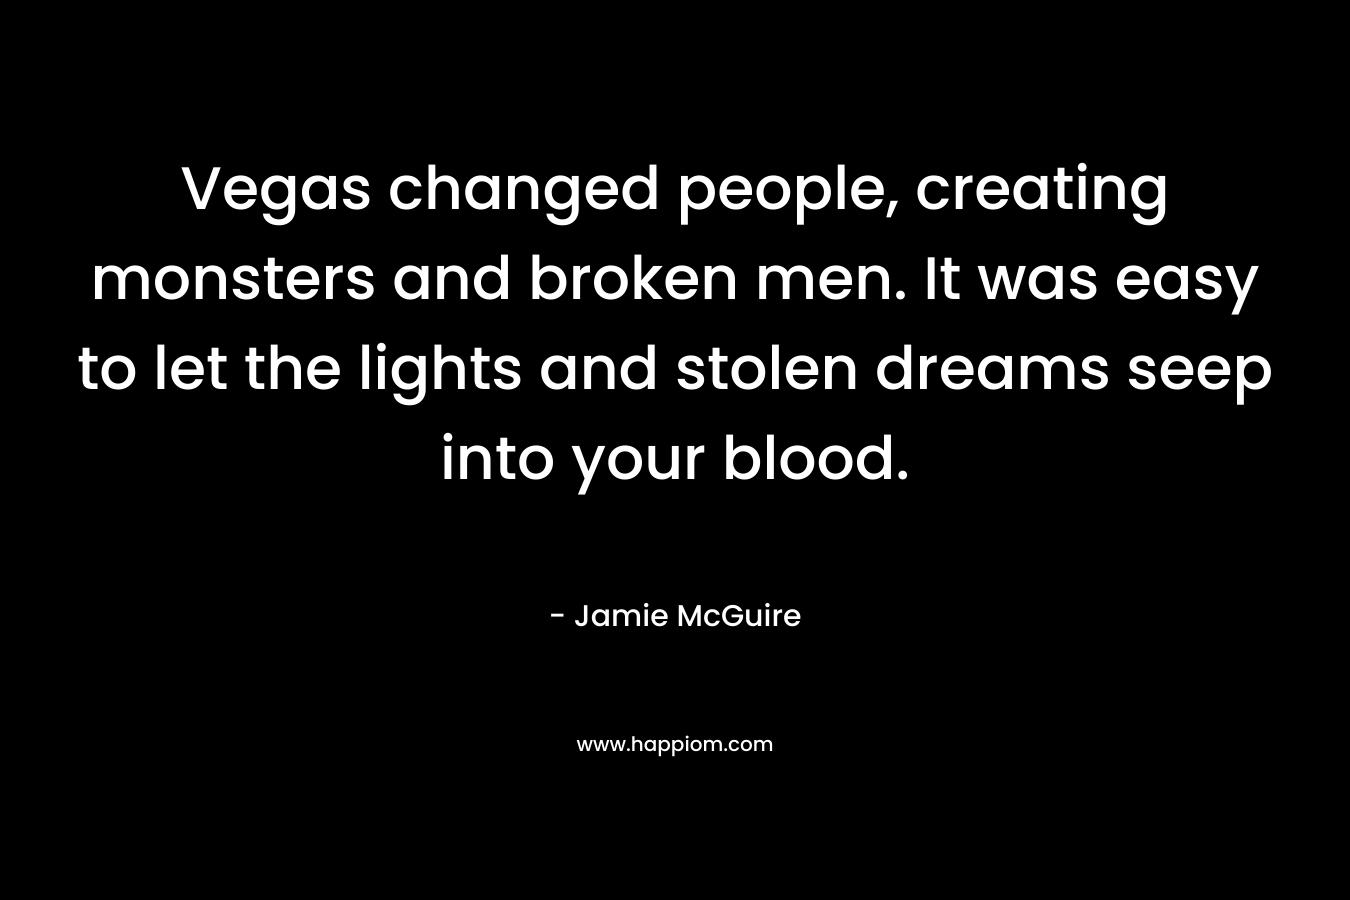 Vegas changed people, creating monsters and broken men. It was easy to let the lights and stolen dreams seep into your blood.